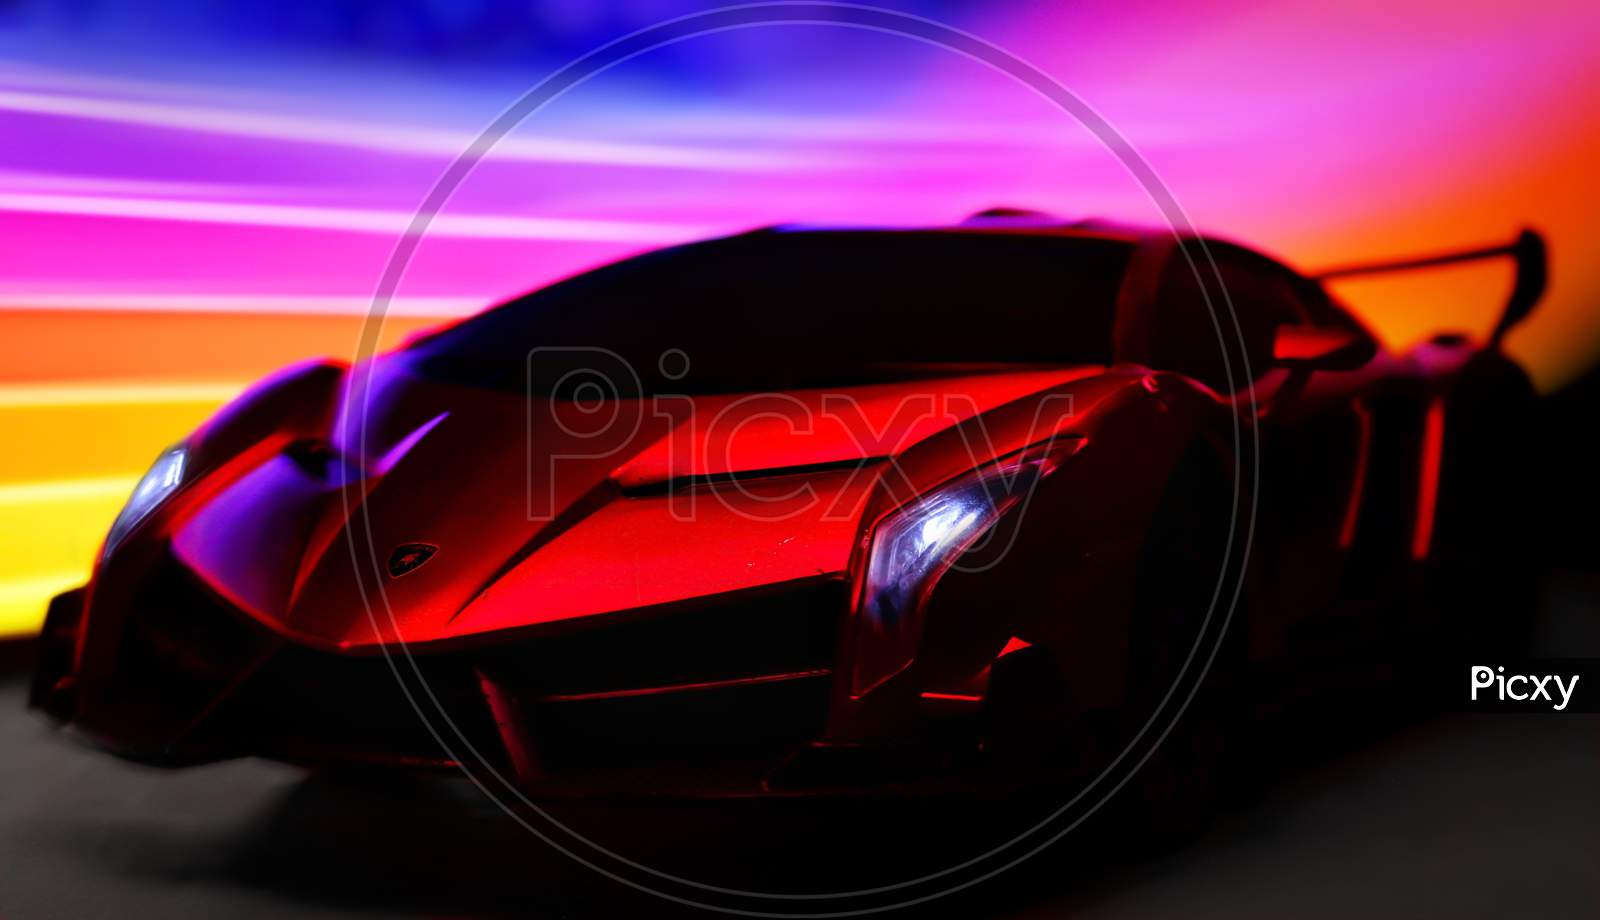 Toy Lamborghini with light painting in background